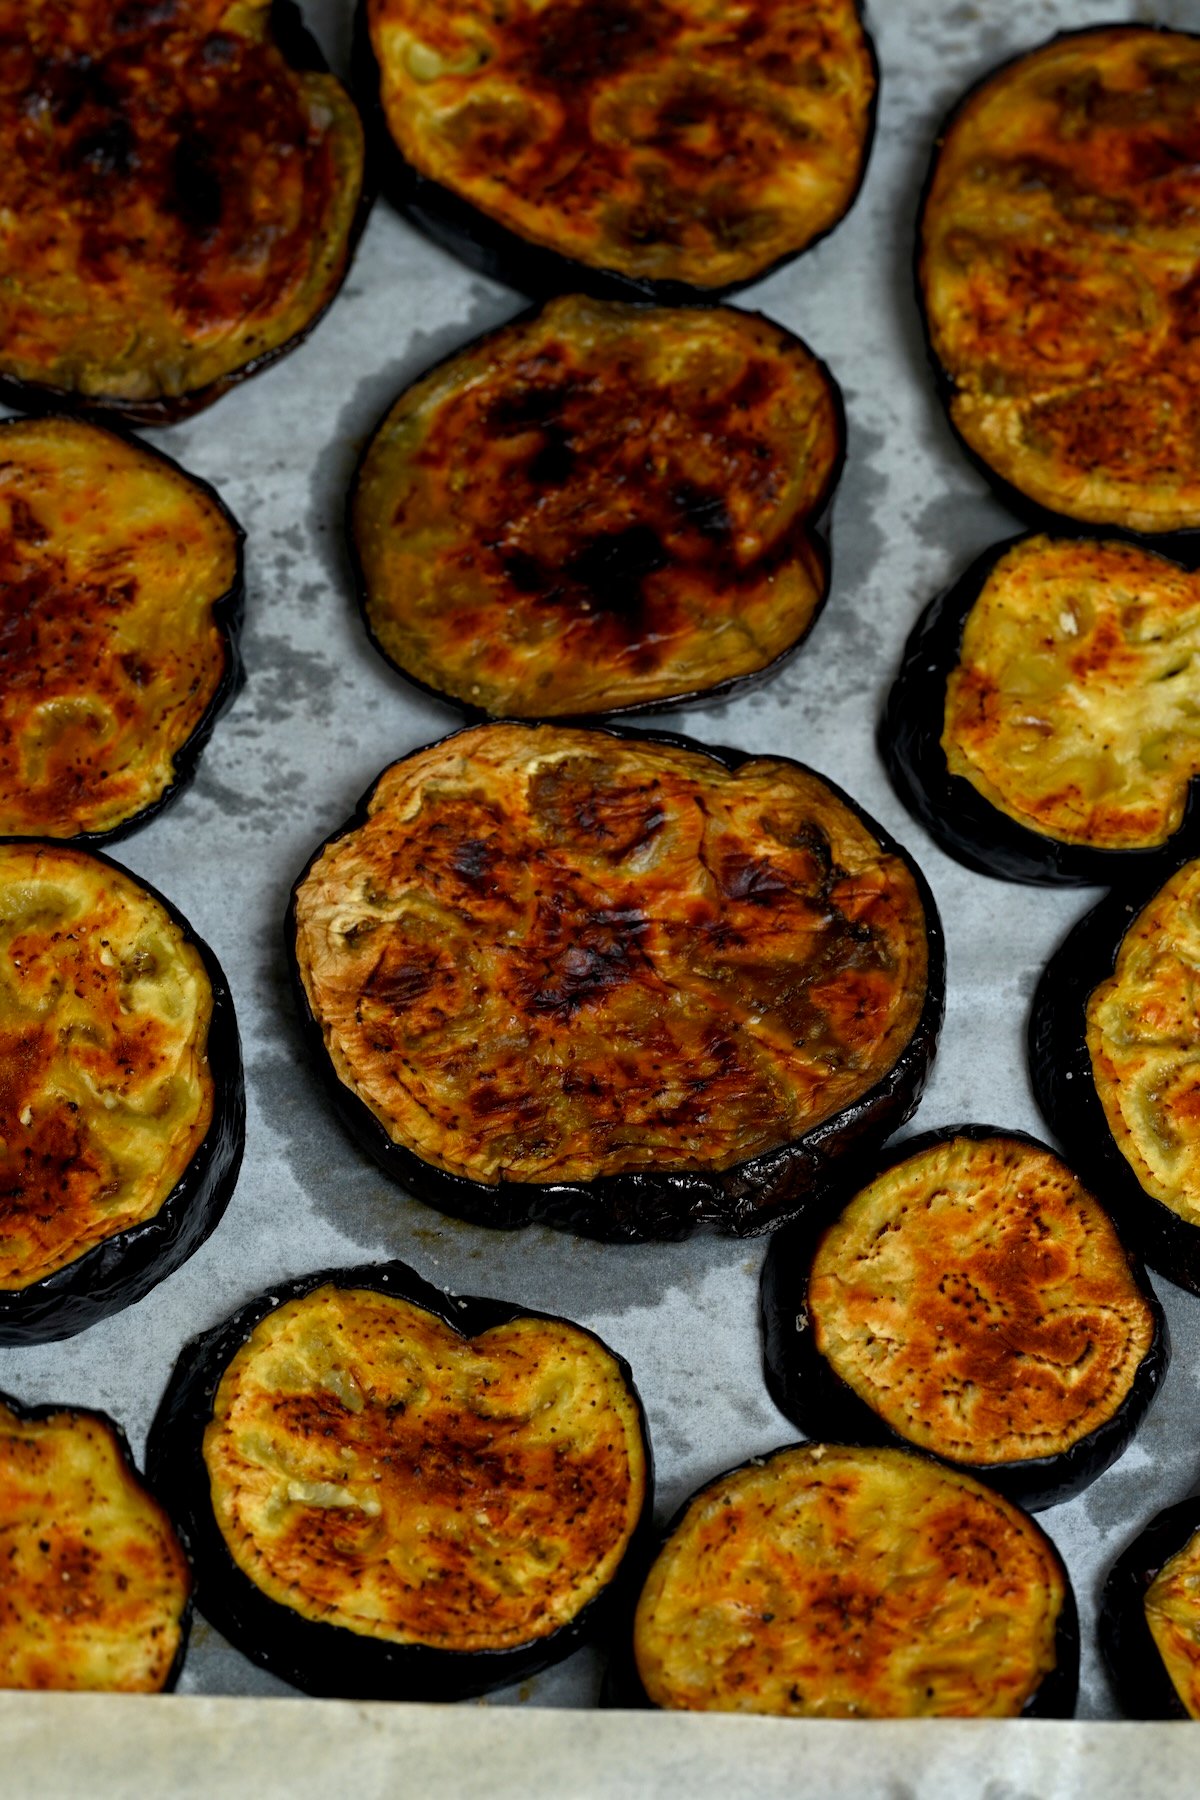 Close up of roasted eggplant slices on a baking tray